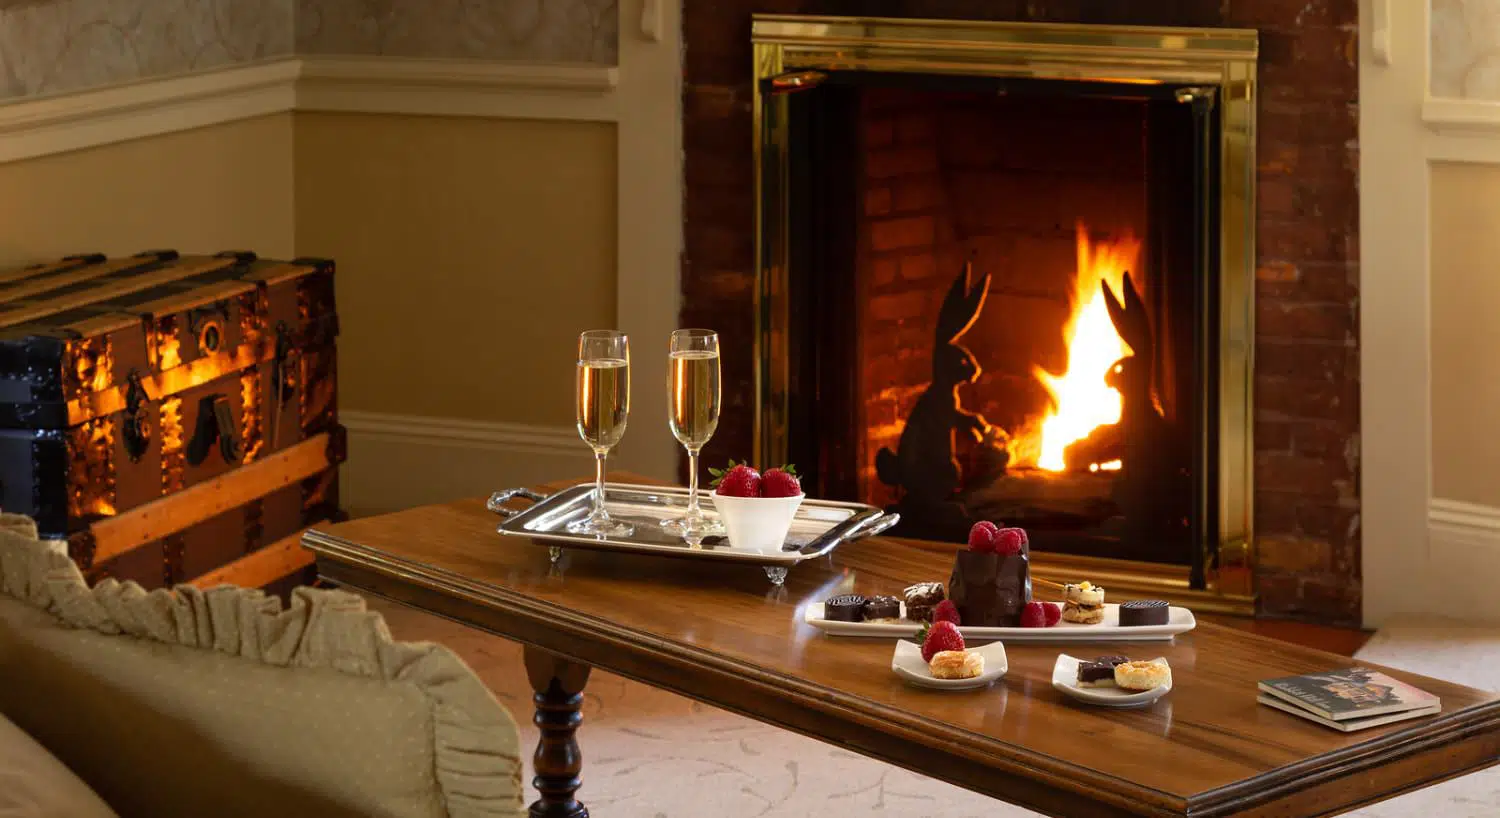 Close up view of sitting area with dark wooden coffee table, silver tray with champagne glasses and bowl of strawberries, white tray with desserts, and a fireplace